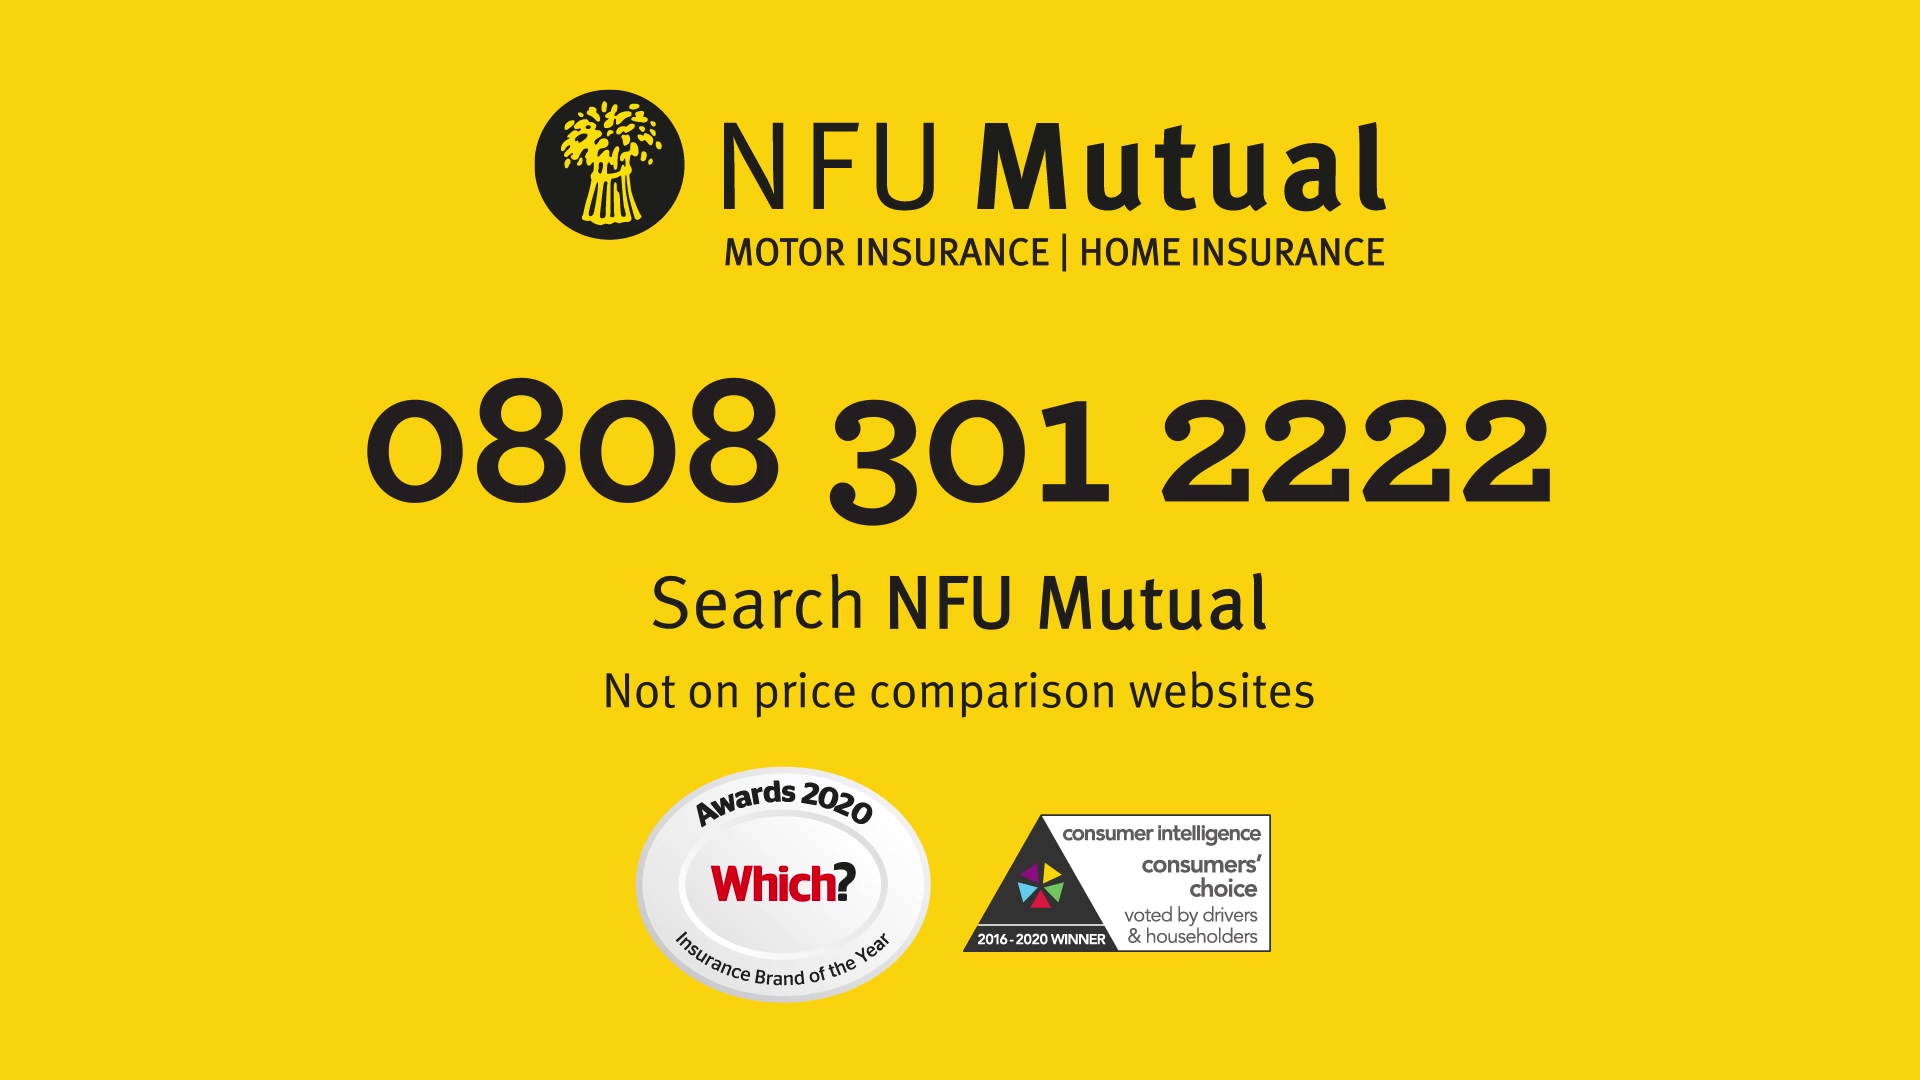 HHP-NFOD103-010_NFU Mutual_Our Difference_TVC_2020_SoD Update_10s_ONLINE_V2